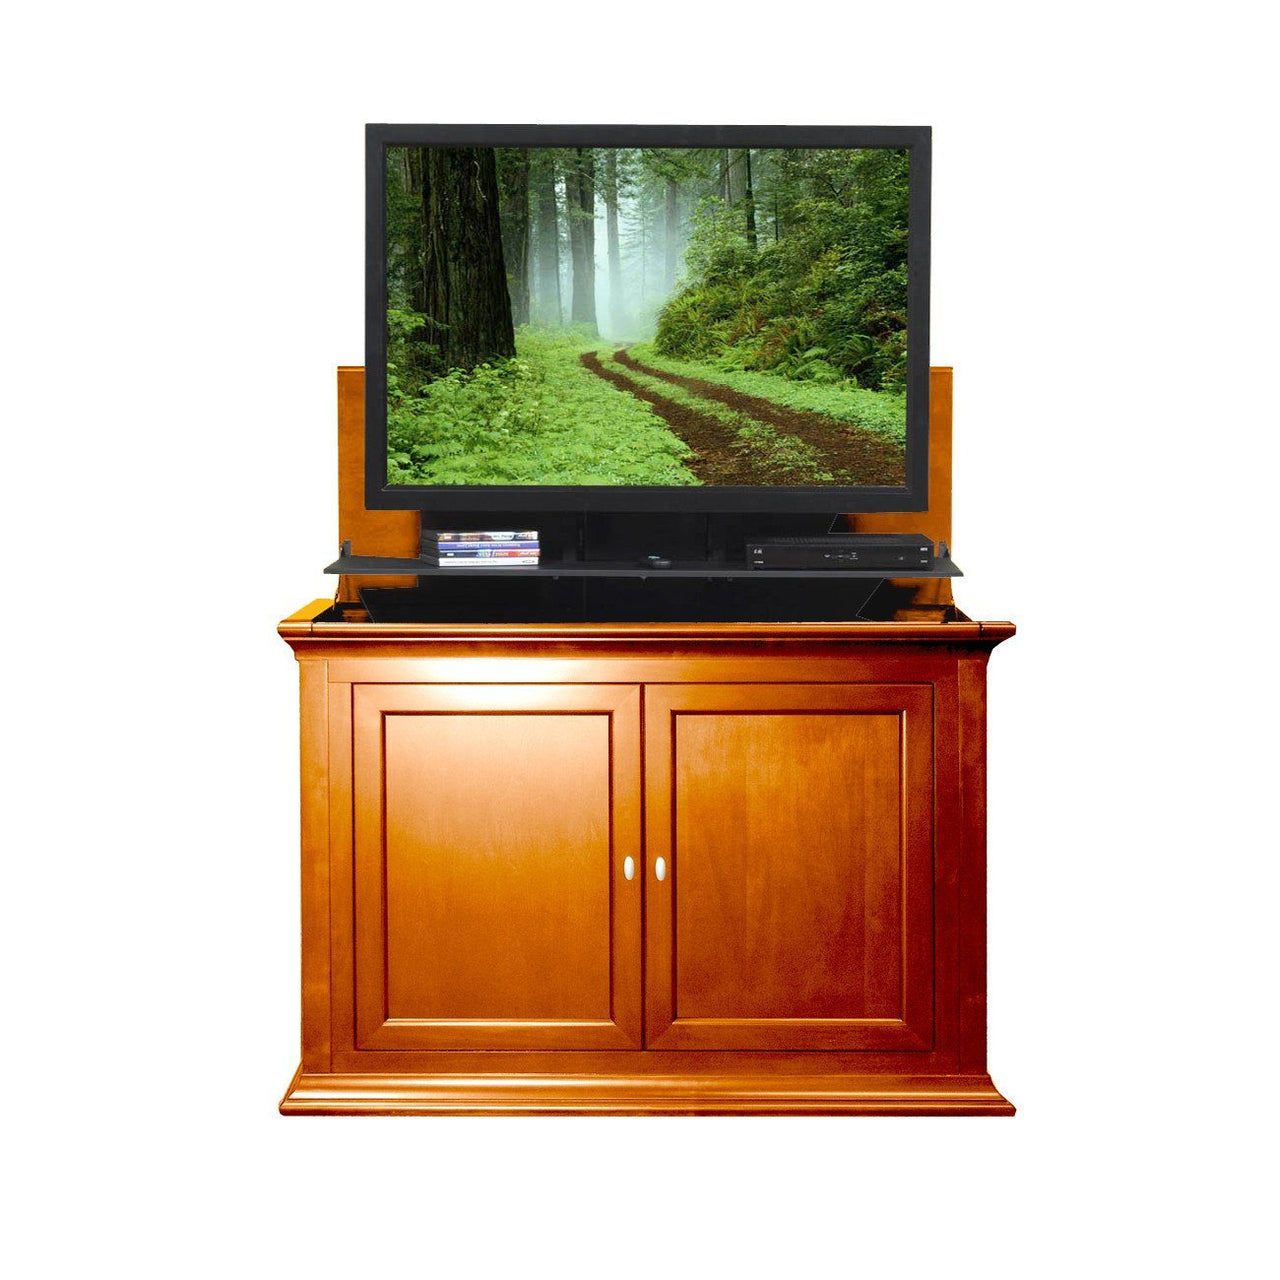 Touchstone Highland Tv Lift Cabinets For Up To 46” Flat Screen Tv’S Tv Lift Cabinets Touchstone 